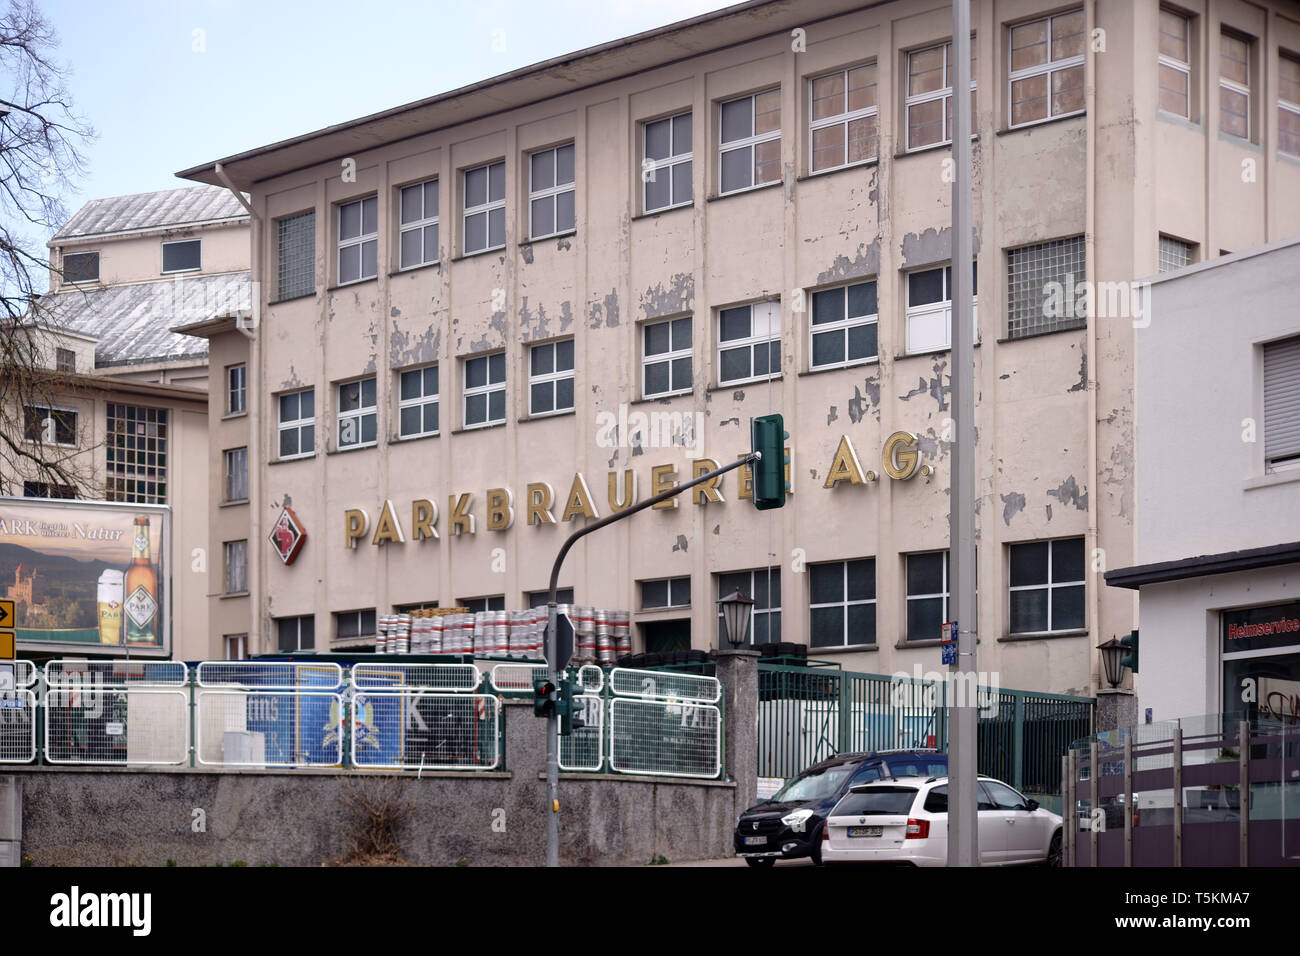 Pirmasens, Germany - March 26, 2019: The vintage facade of an industrial building on the grounds of the Park brewery on March 26, 2019 in Pirmasens. Stock Photo